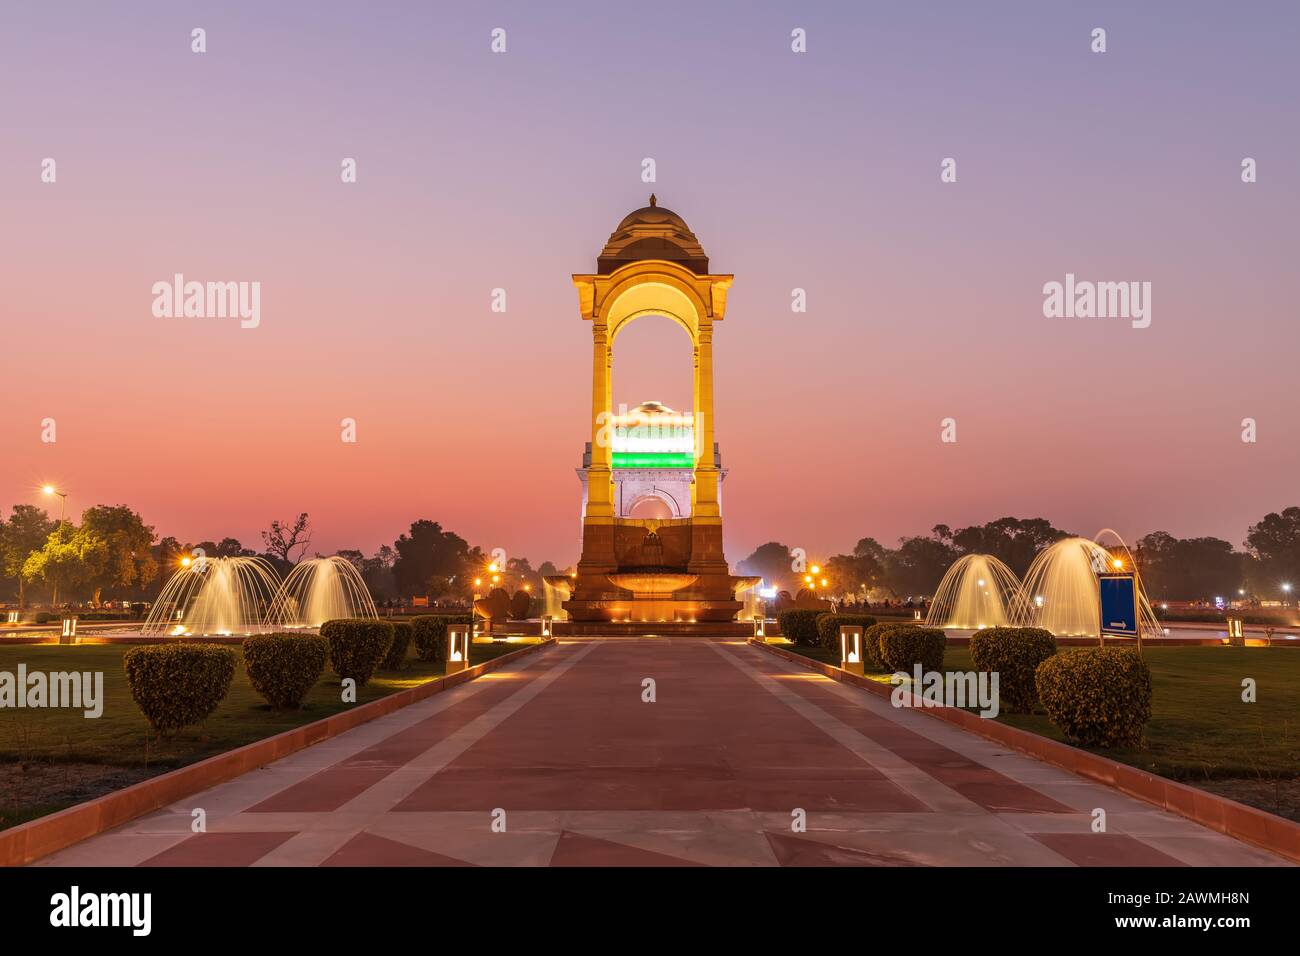 The Canopy and the India Gate in twilight, view from the National War Memorial, New Delhi, India Stock Photo